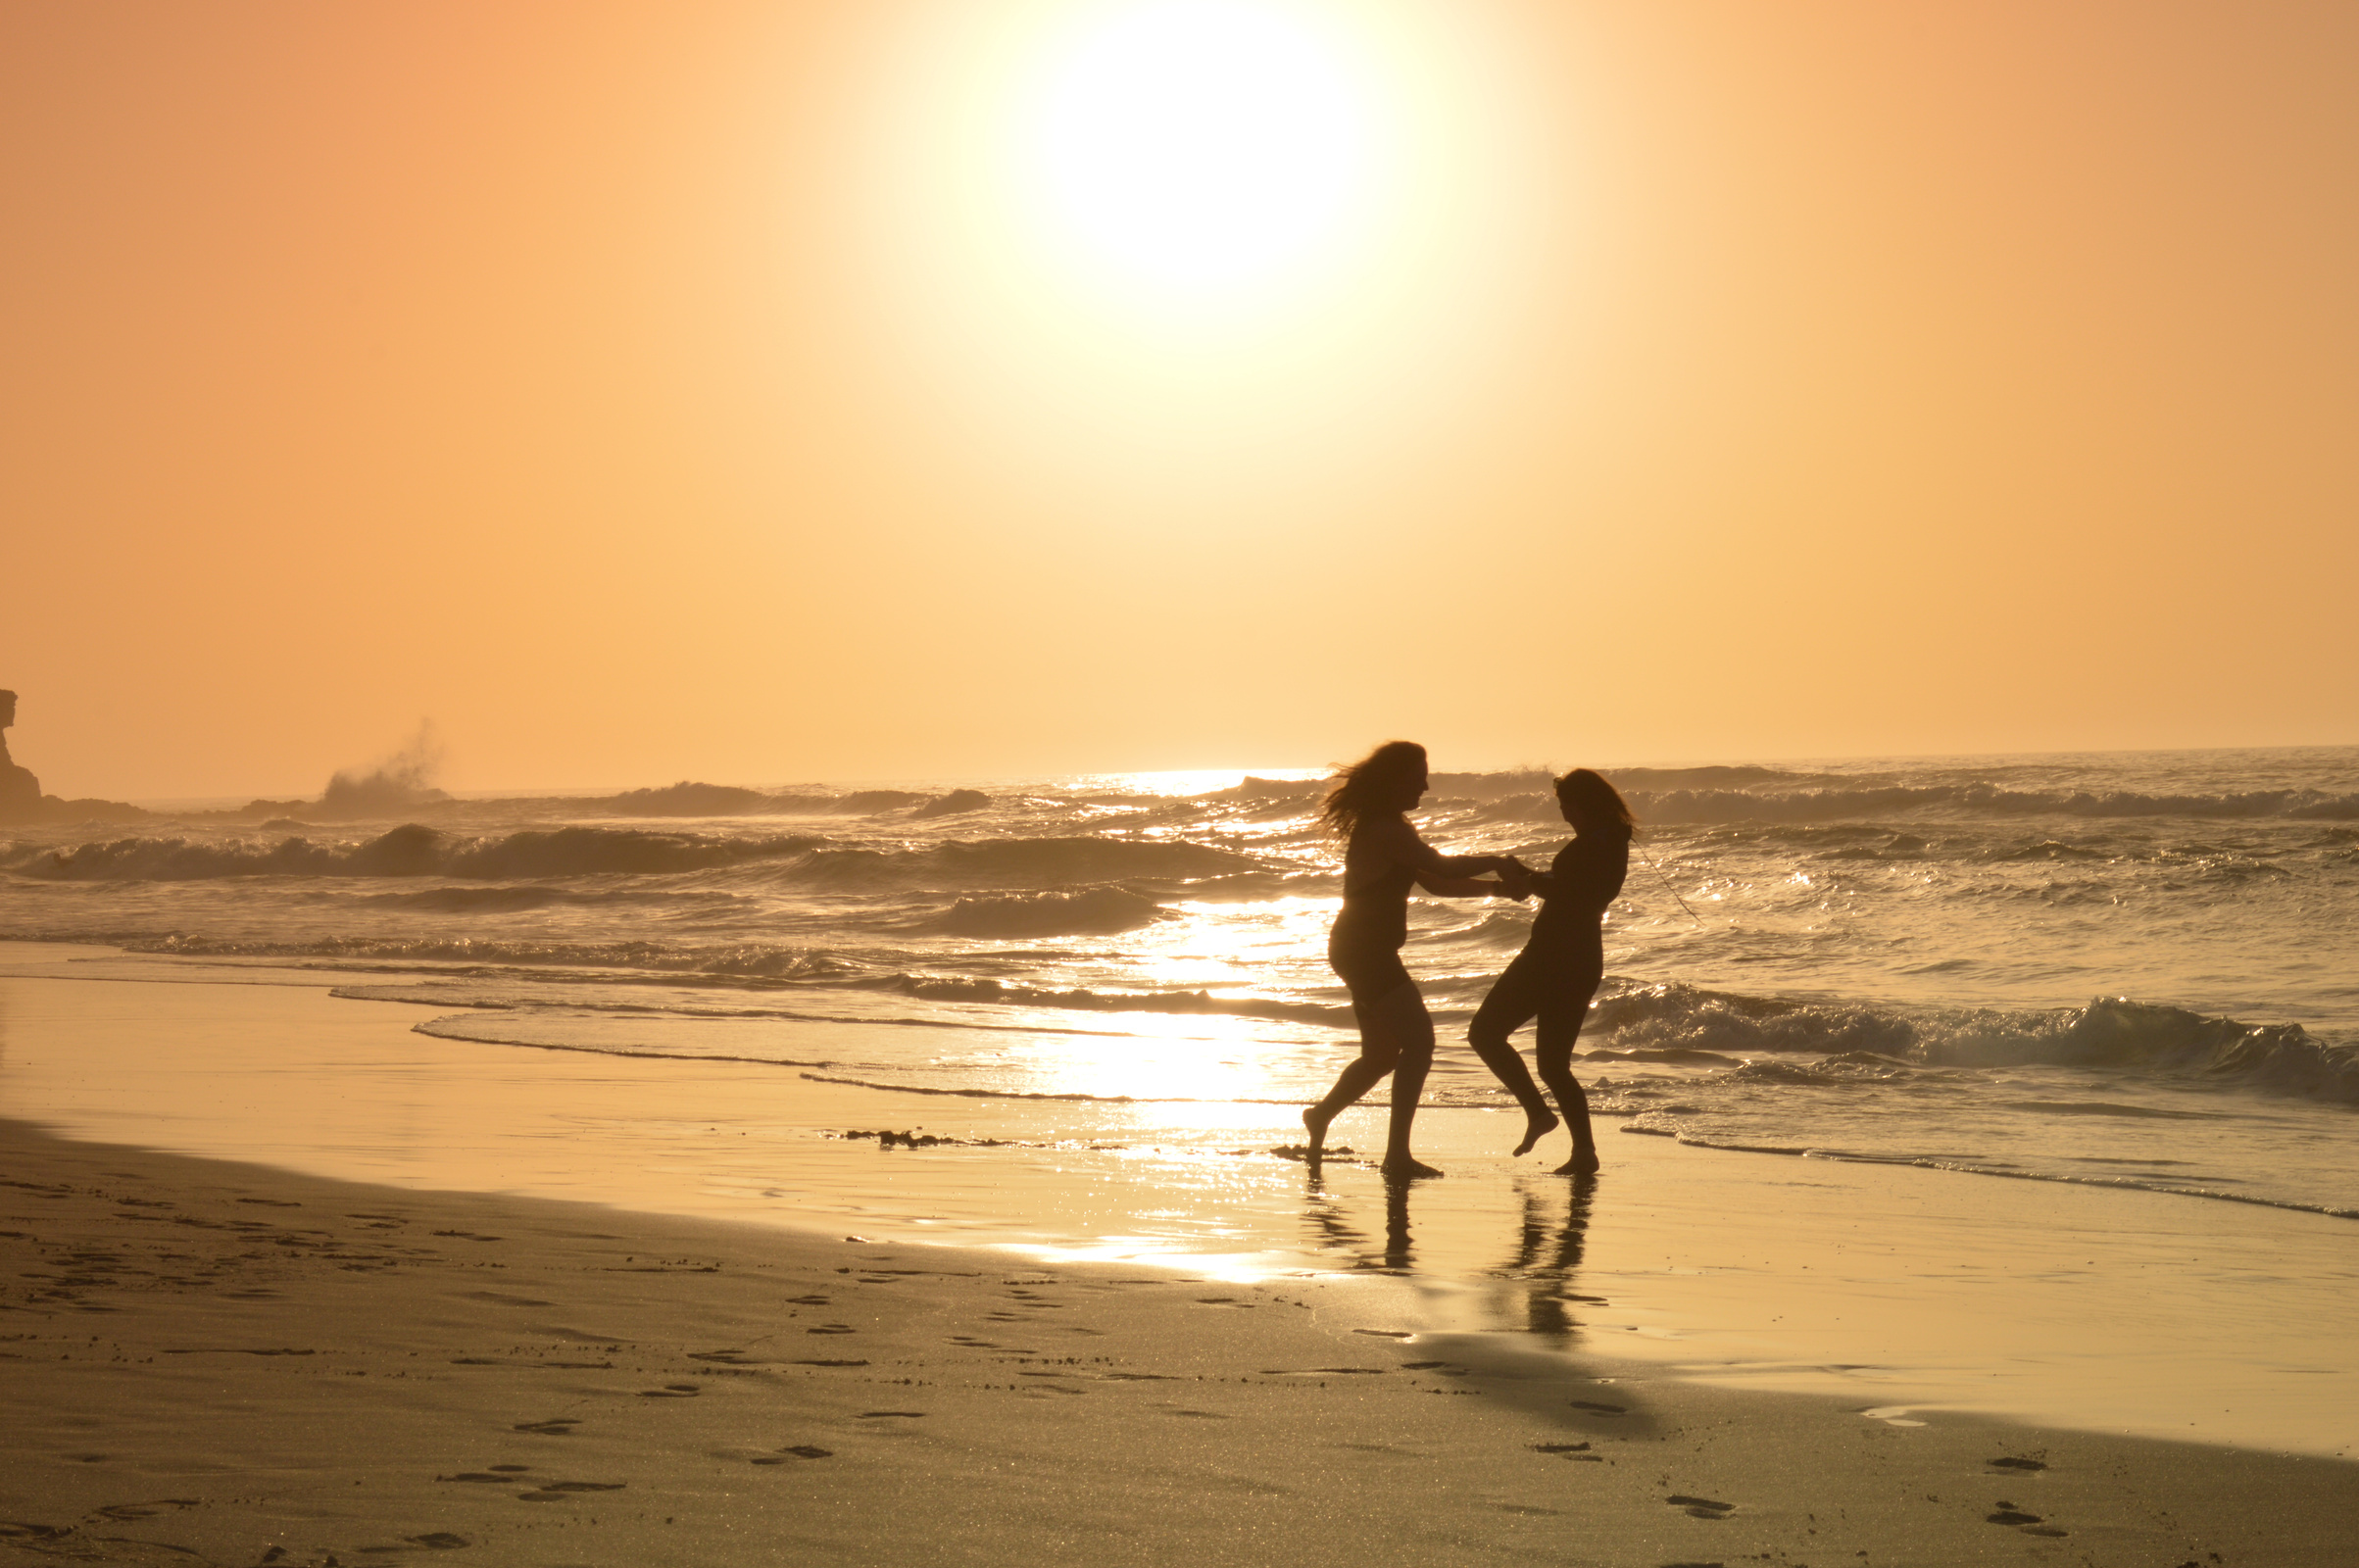 Silhouette of Women at the Beach